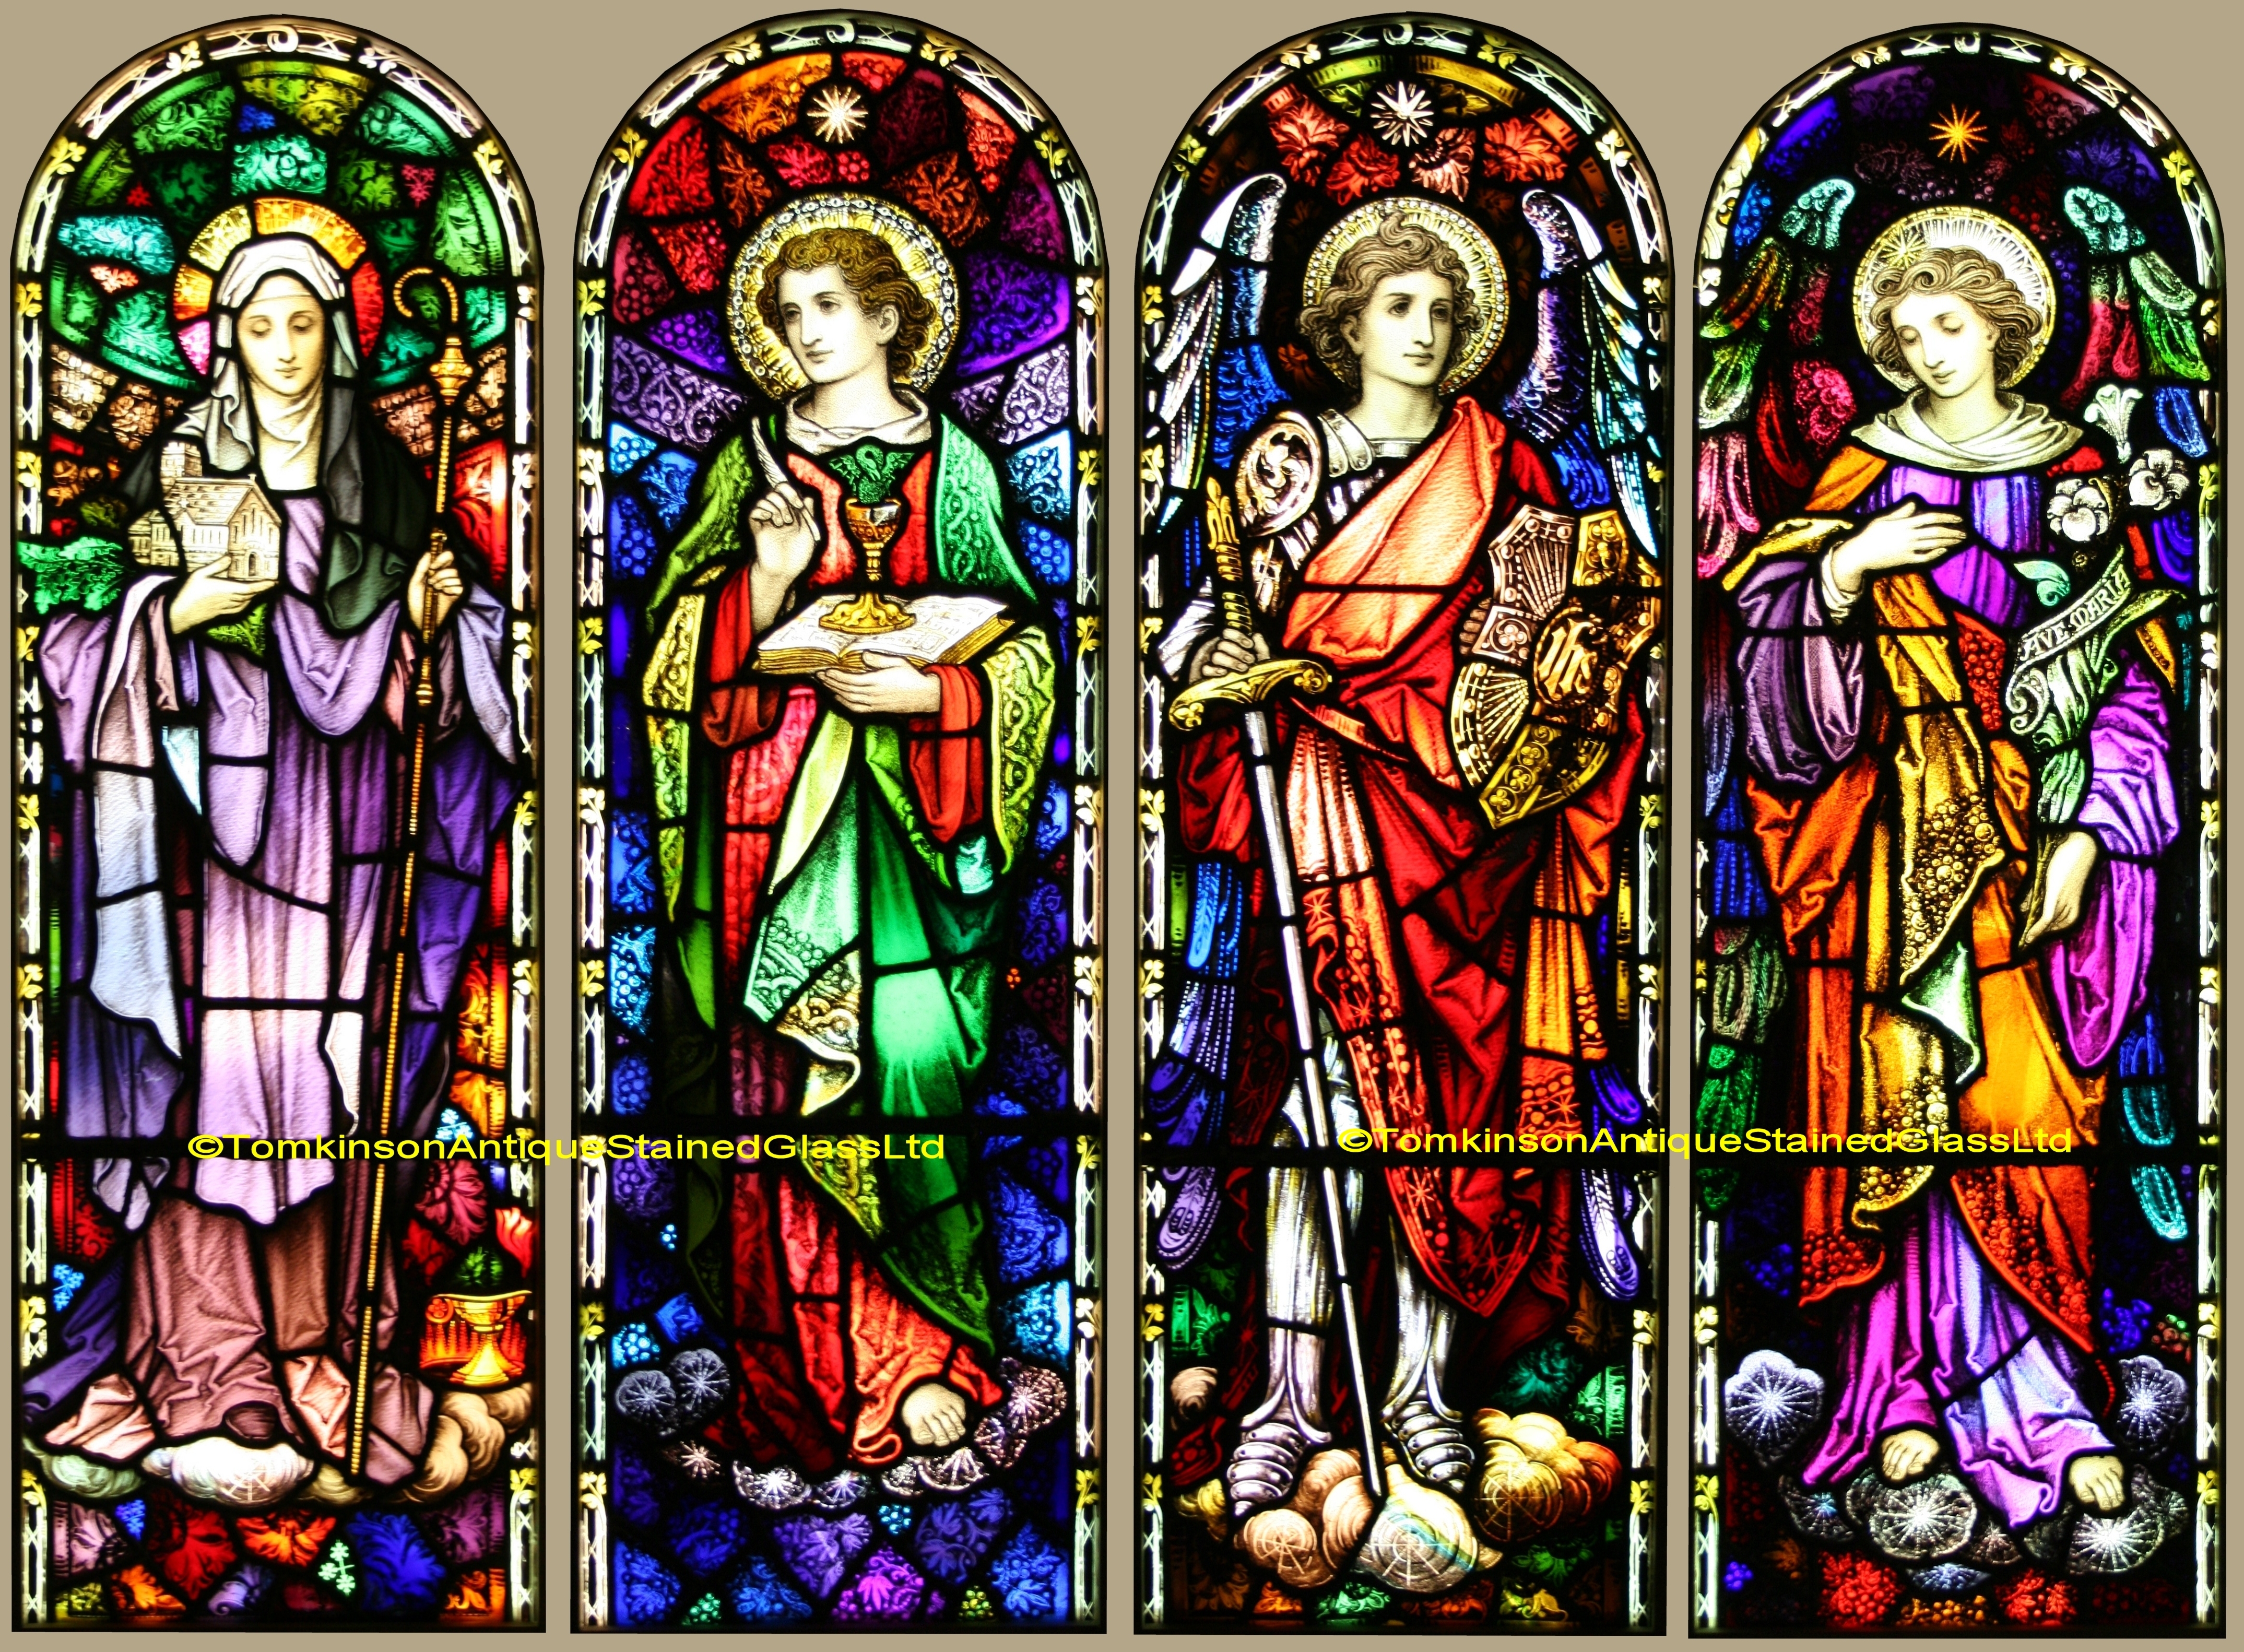 Ref Rel340 4 Antique Religious Church Stained Glass Windows By Earley Studios Dublin Ireland Tomkinson Stained Glass